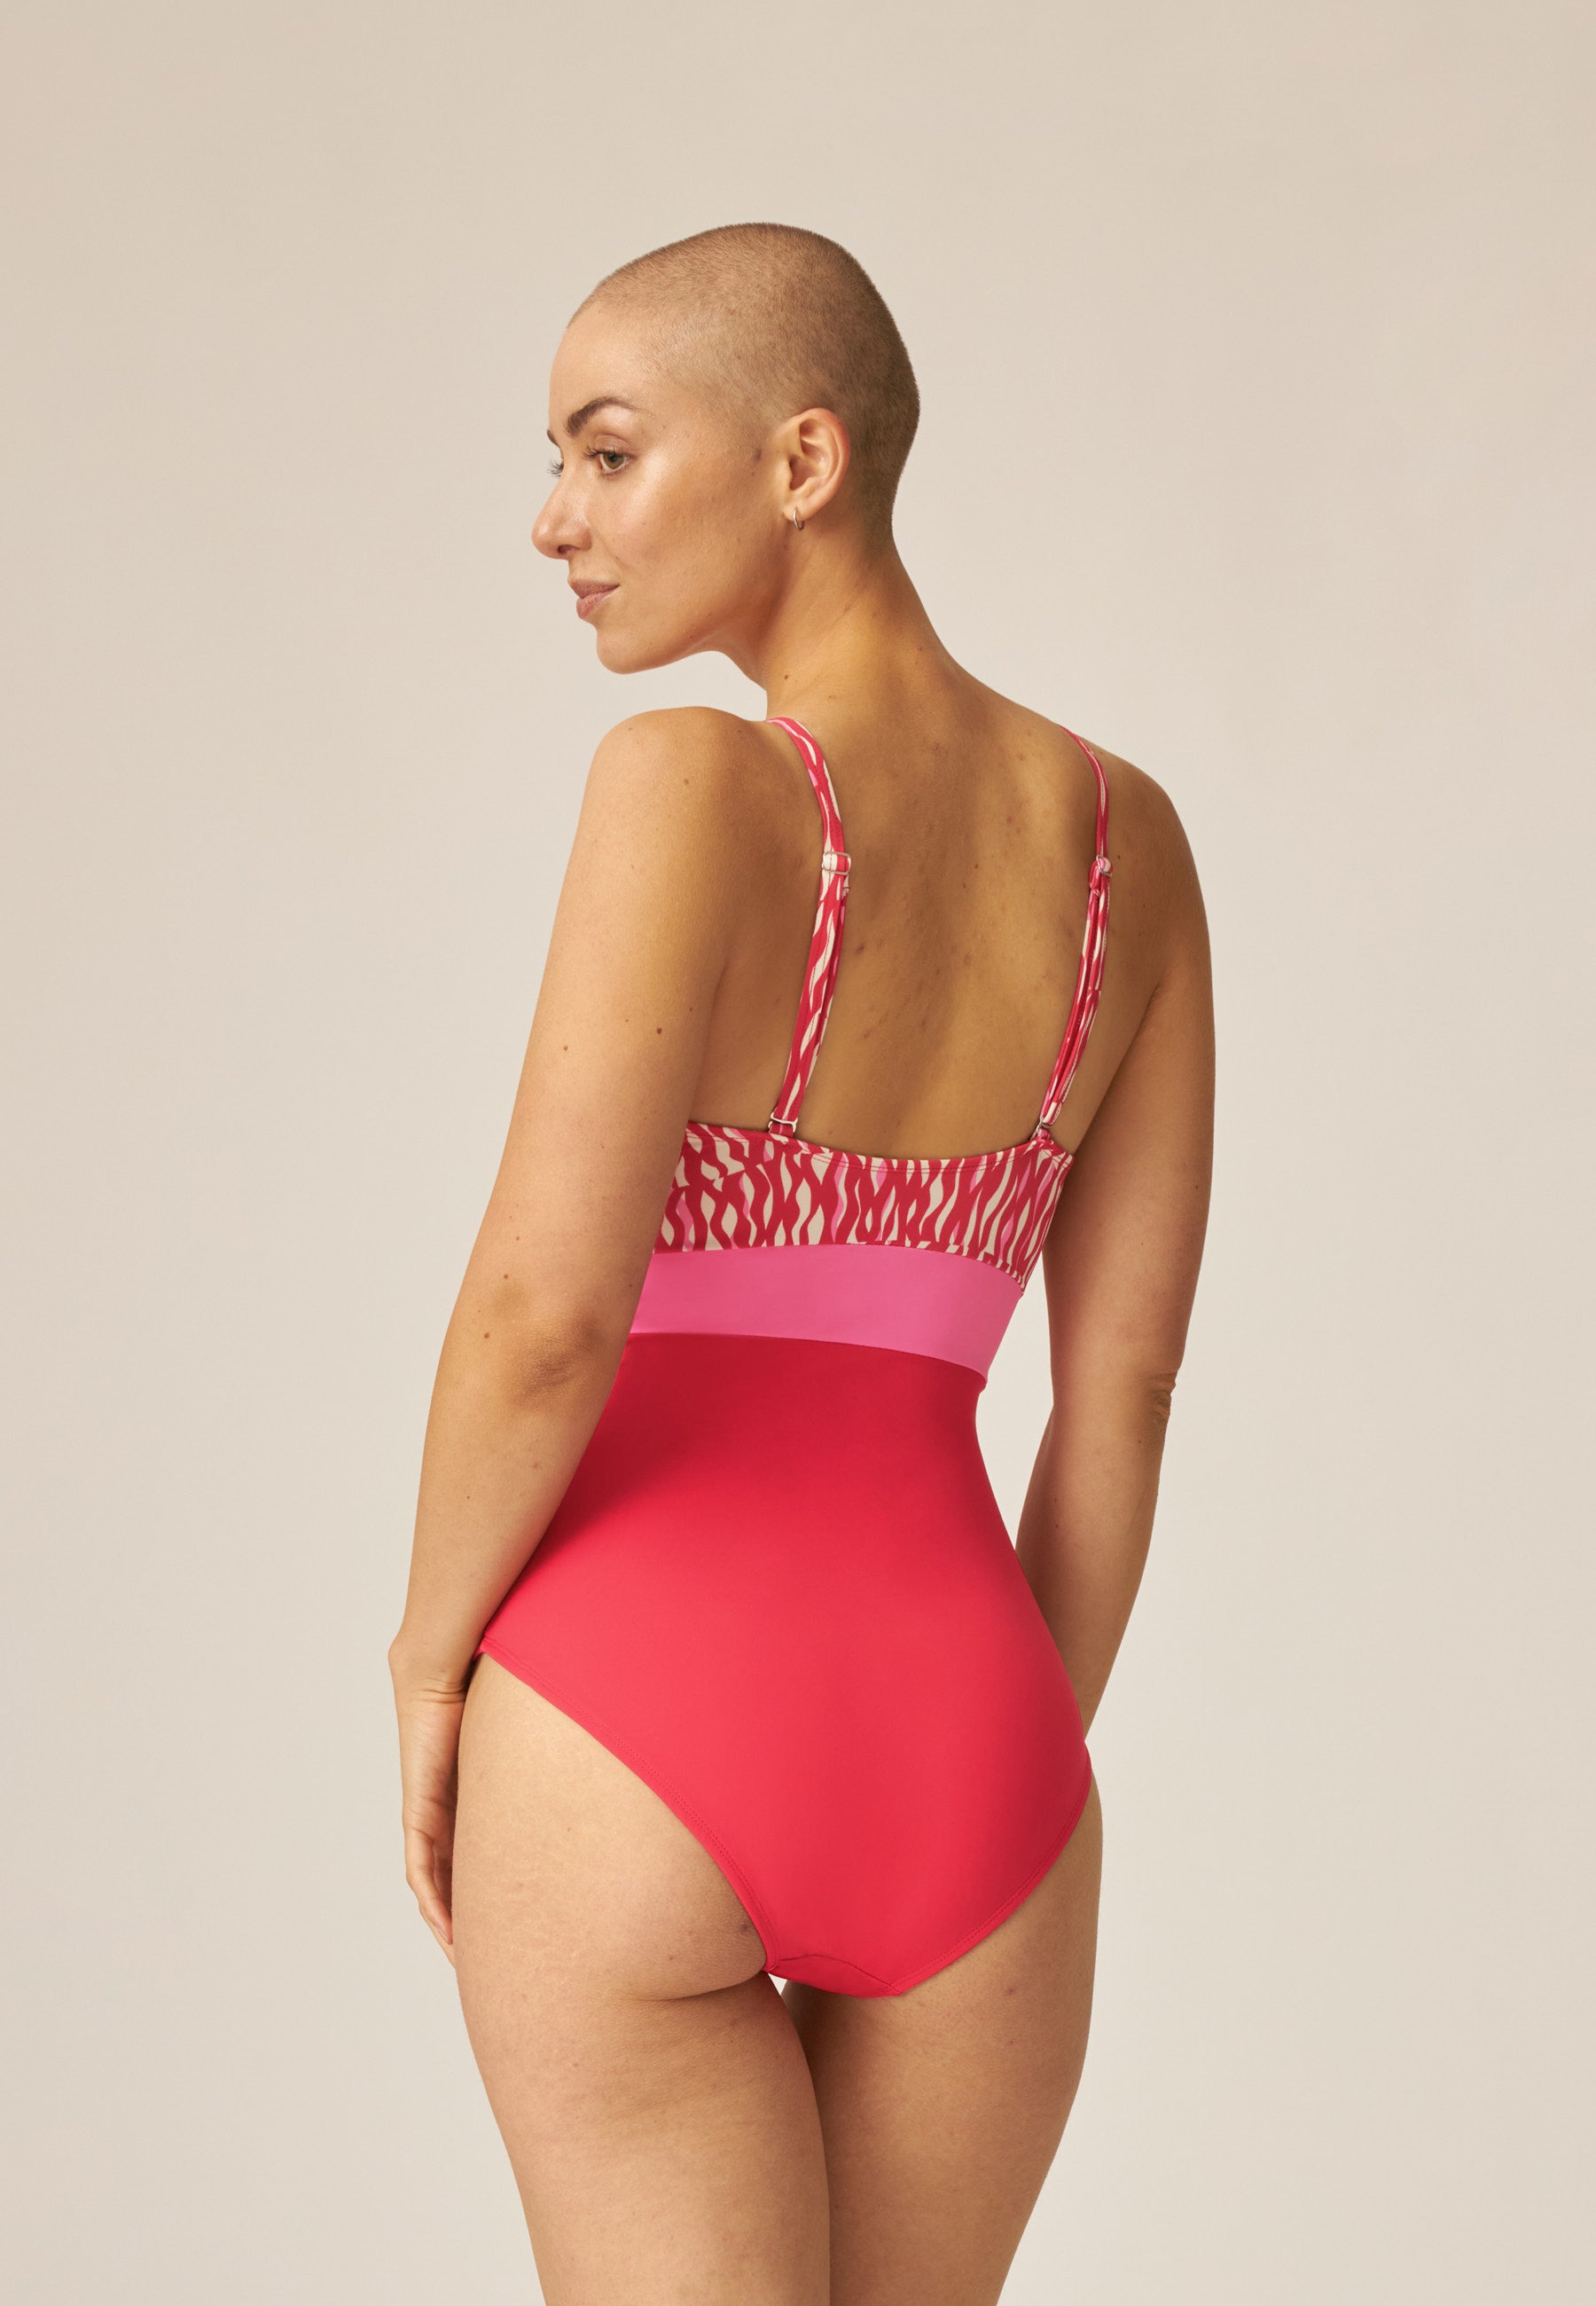 Swimsuit with cup - Small Escapes / Safari Park - Red Pink Ecru